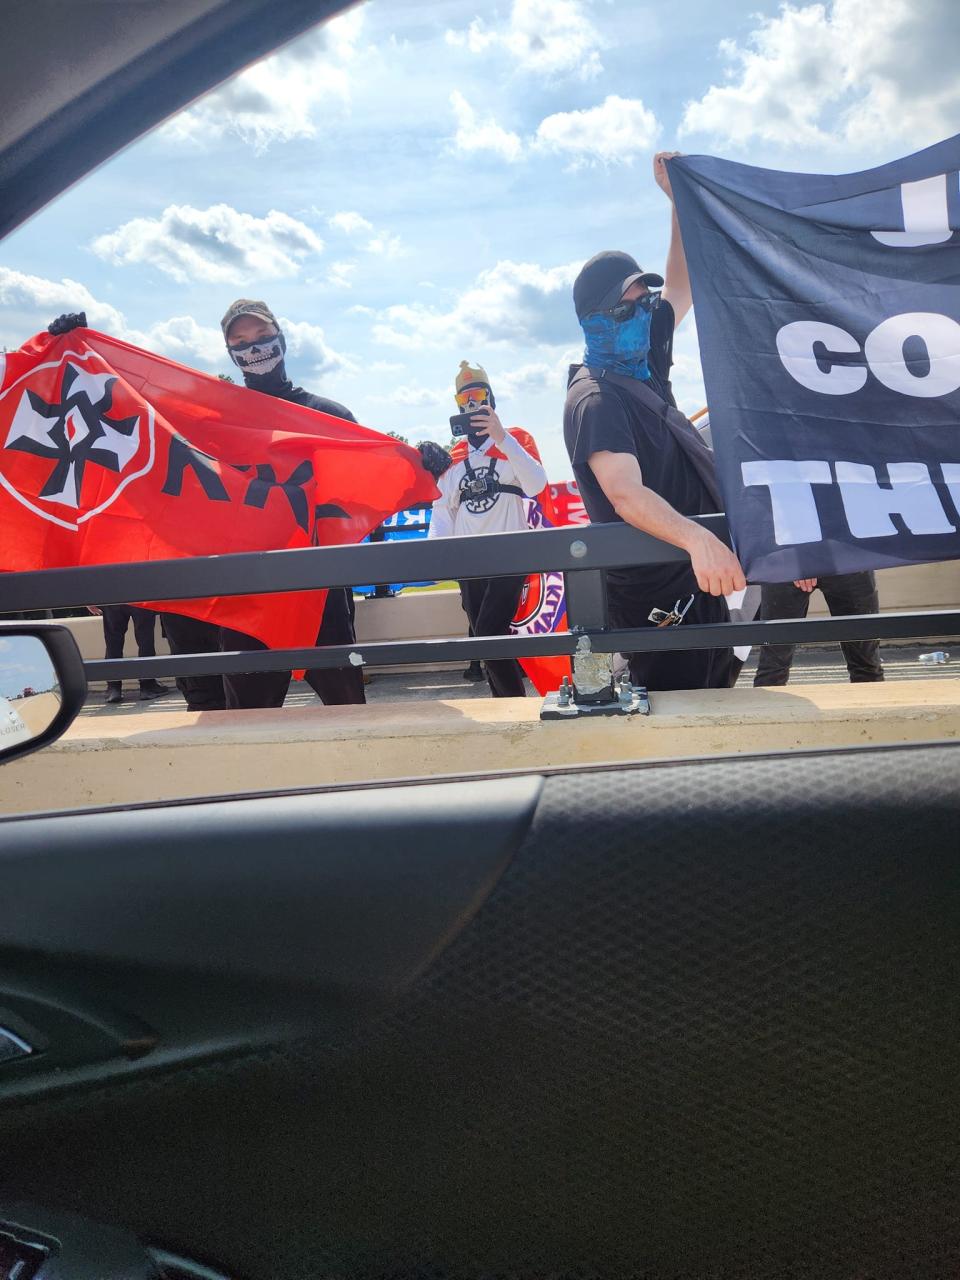 A demonstration Saturday, July 20, saw participants waving flags with antisemitic and white supremacist messaging, alongside a Trump flag, in Howell.